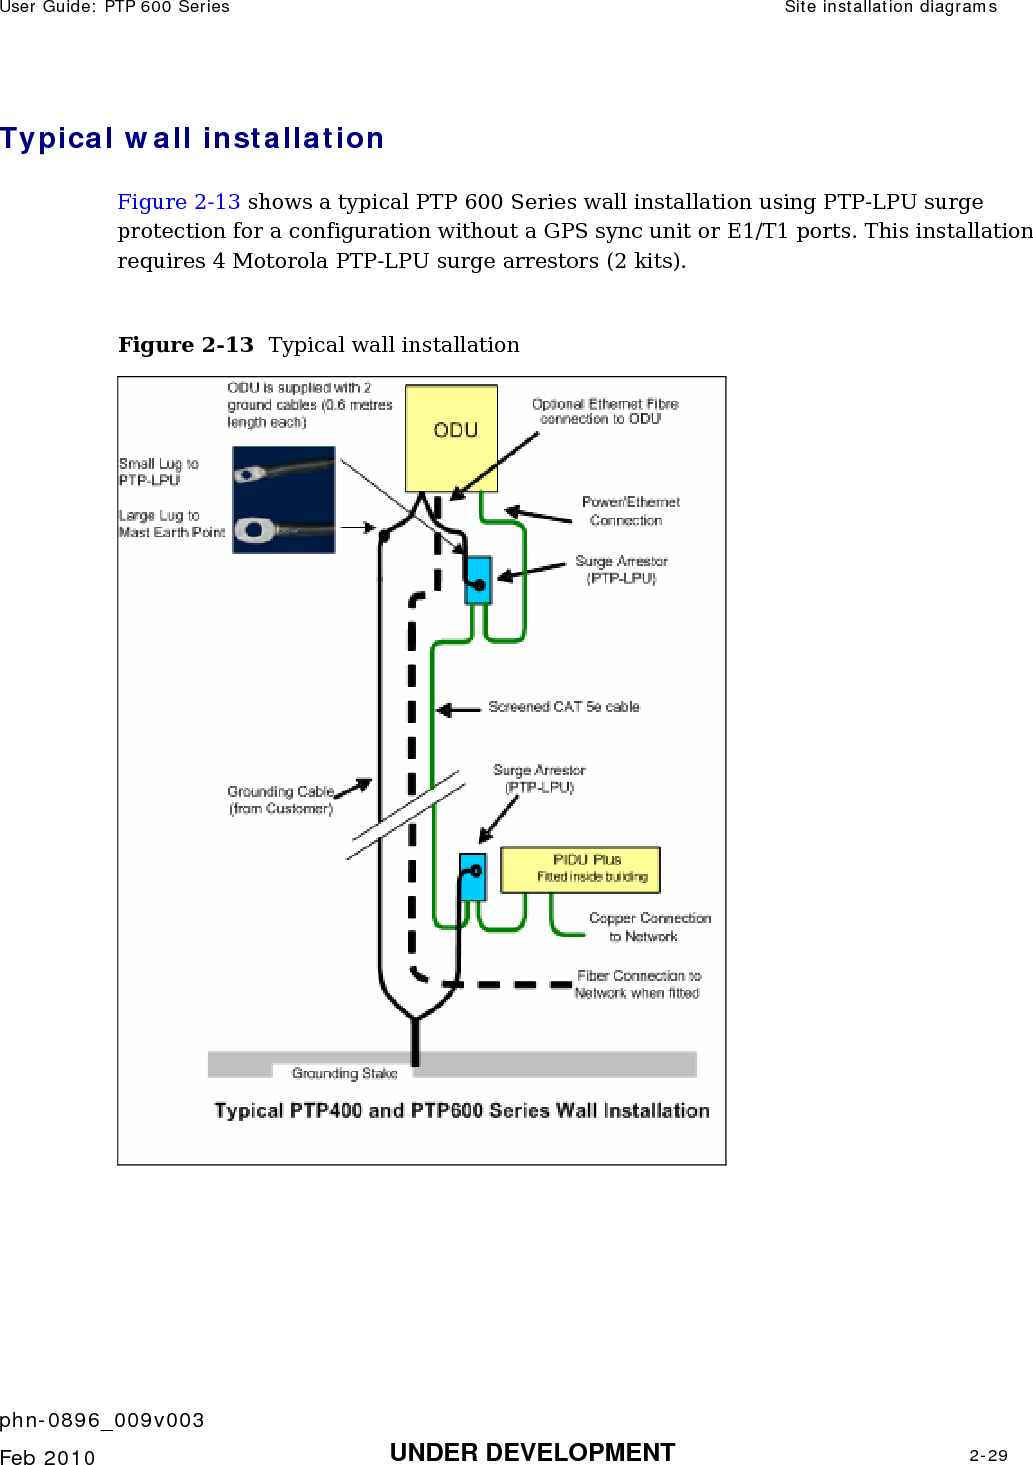 User Guide: PTP 600 Series  Site installation diagrams    phn-0896_009v003   Feb 2010  UNDER DEVELOPMENT  2-29  Typical wall installation Figure 2-13 shows a typical PTP 600 Series wall installation using PTP-LPU surge protection for a configuration without a GPS sync unit or E1/T1 ports. This installation requires 4 Motorola PTP-LPU surge arrestors (2 kits).  Figure 2-13  Typical wall installation    